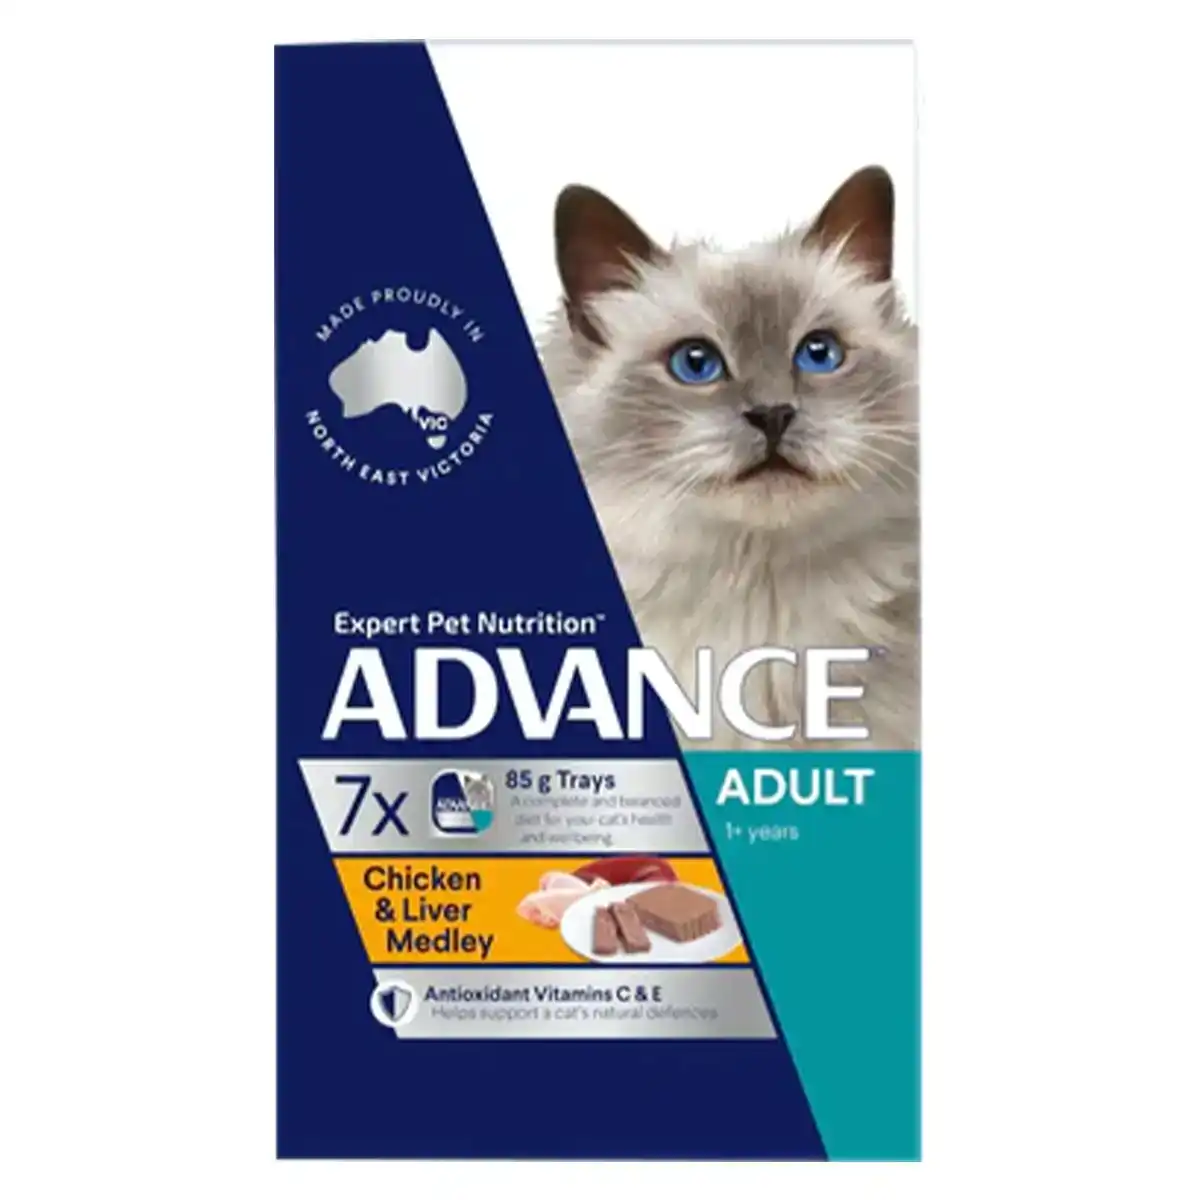 ADVANCE Adult Chicken & Liver Medley Trays Wet Cat Food (85G*7) 1 Pack